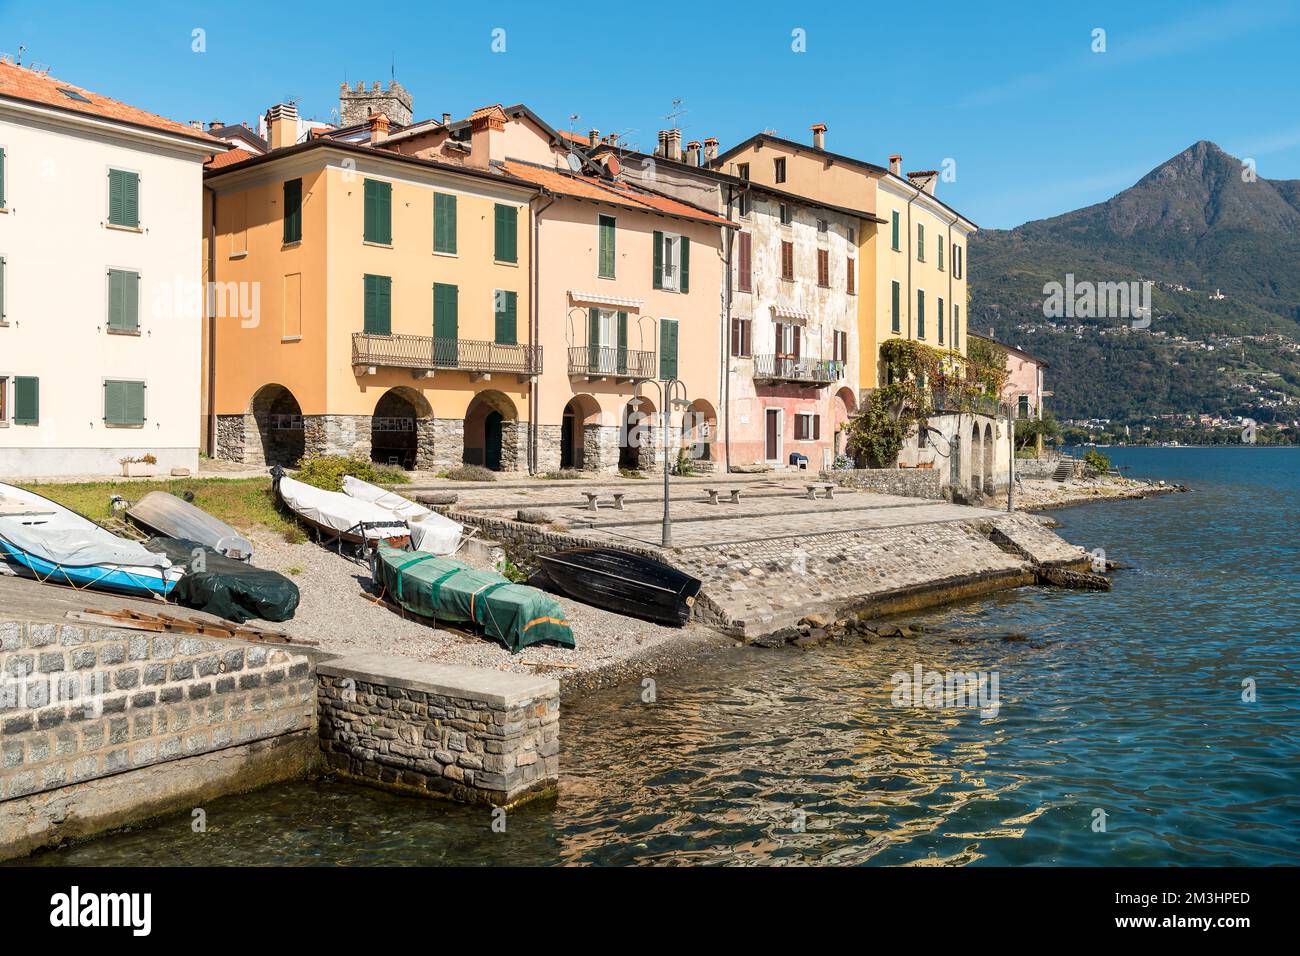 Lakefront of the San Siro village, situated on the shore of Lake Como, at autumn time, Lombardy, Italy Stock Photo